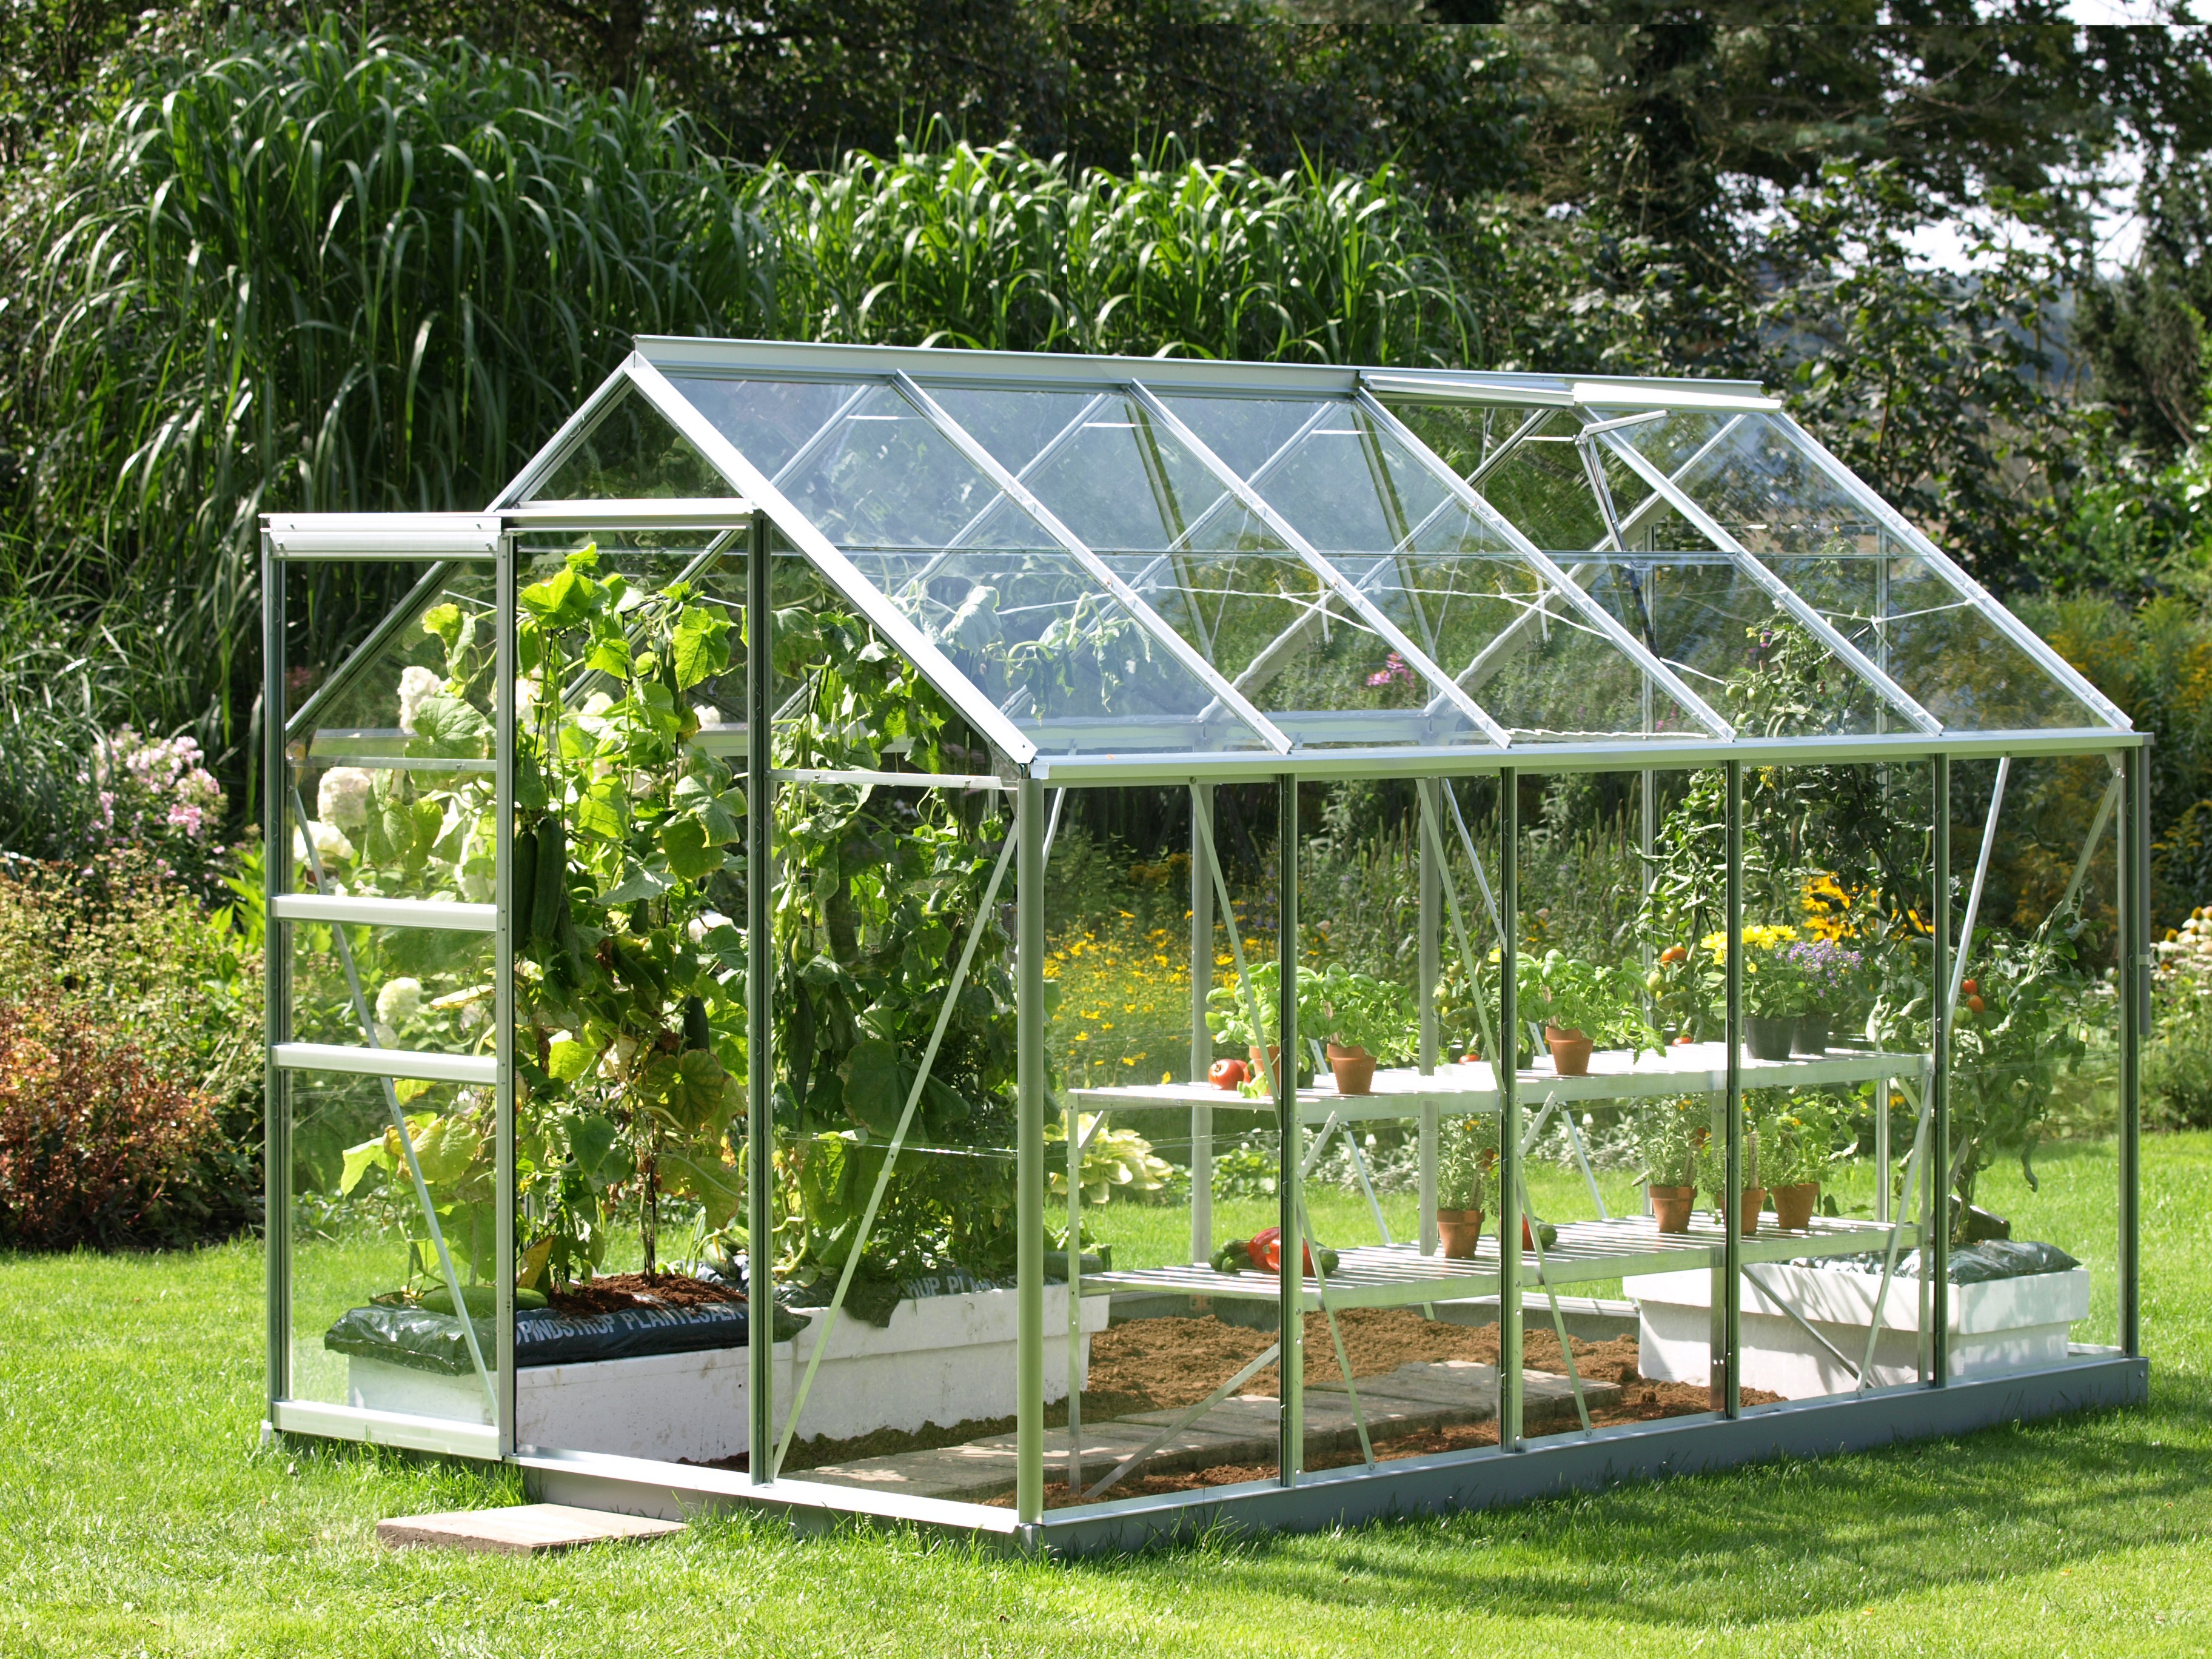 Pros and Cons of Greenhouse Growing | MidAtlantic Farm Credit